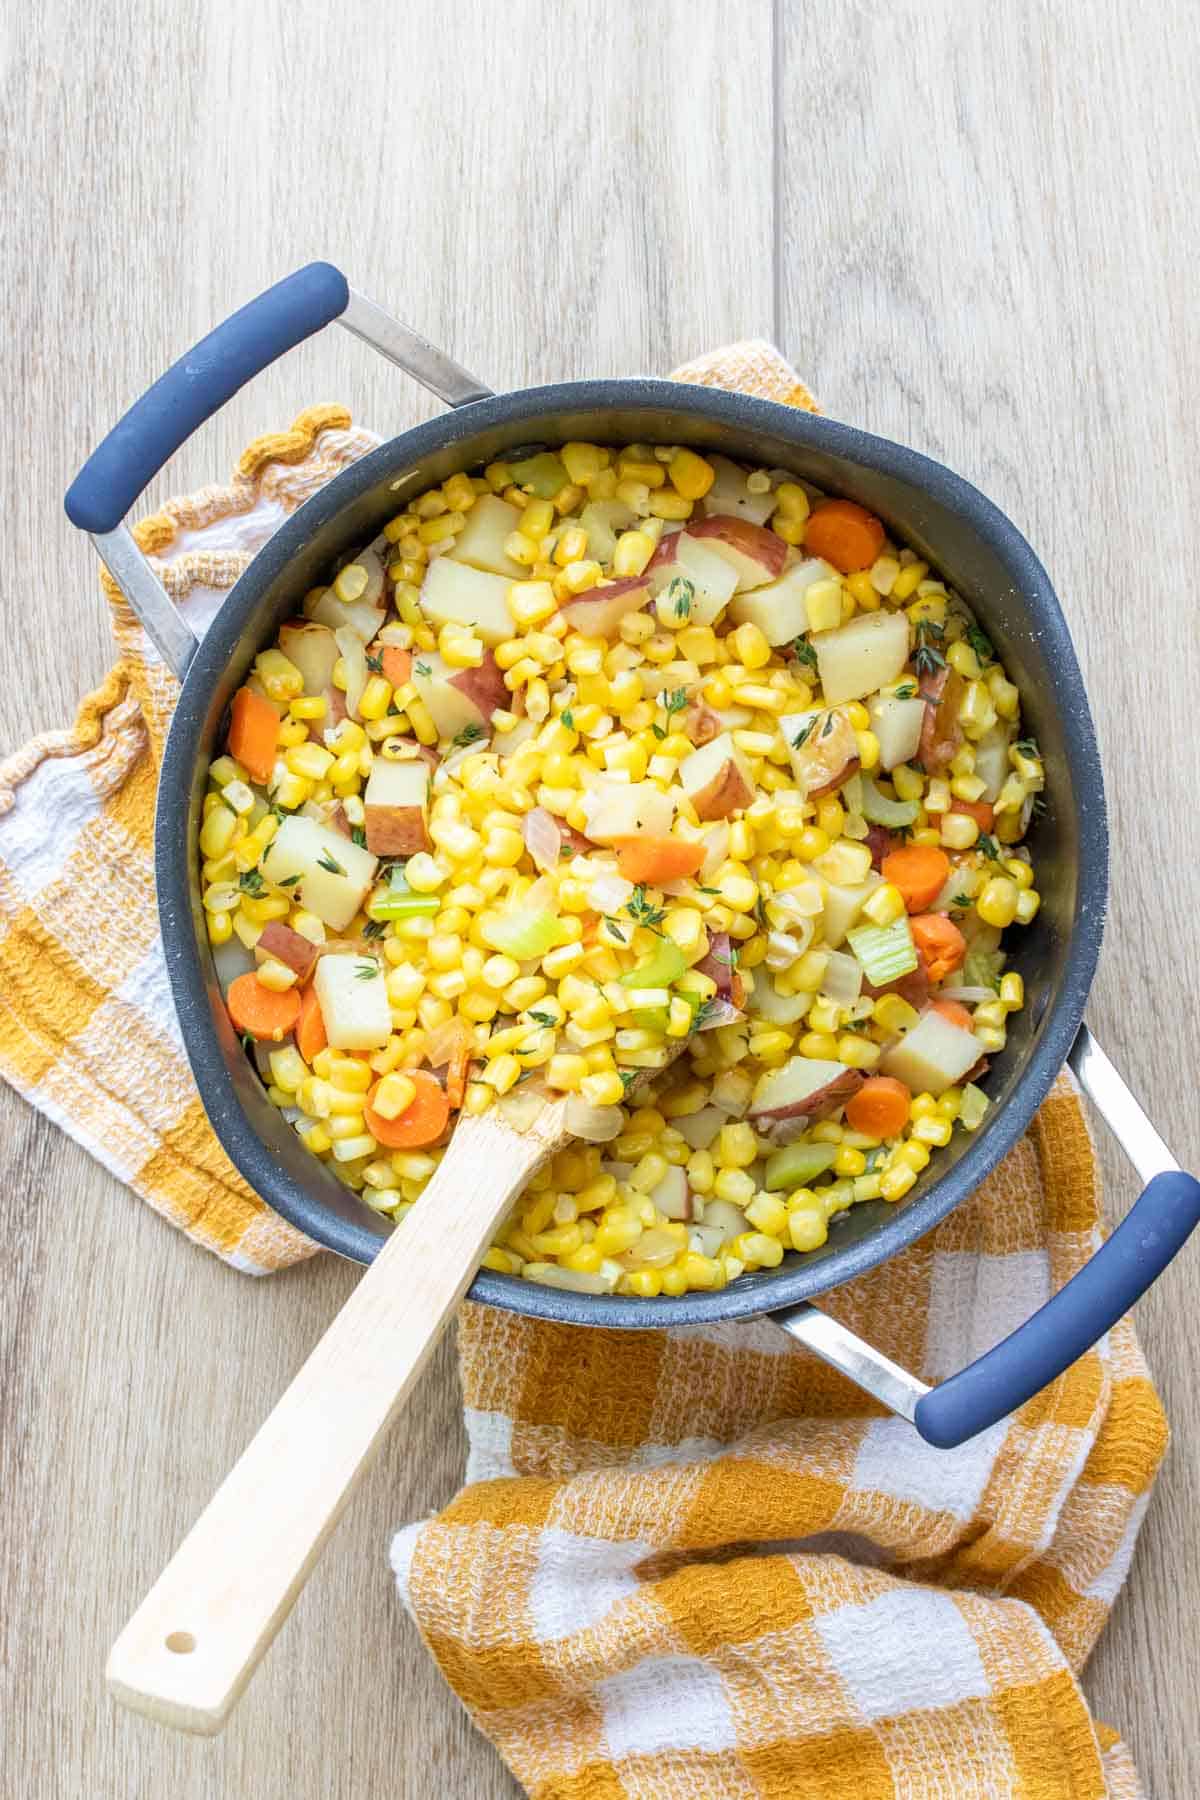 Corn, potatoes and carrots being mixed in a pot by a wooden spoon